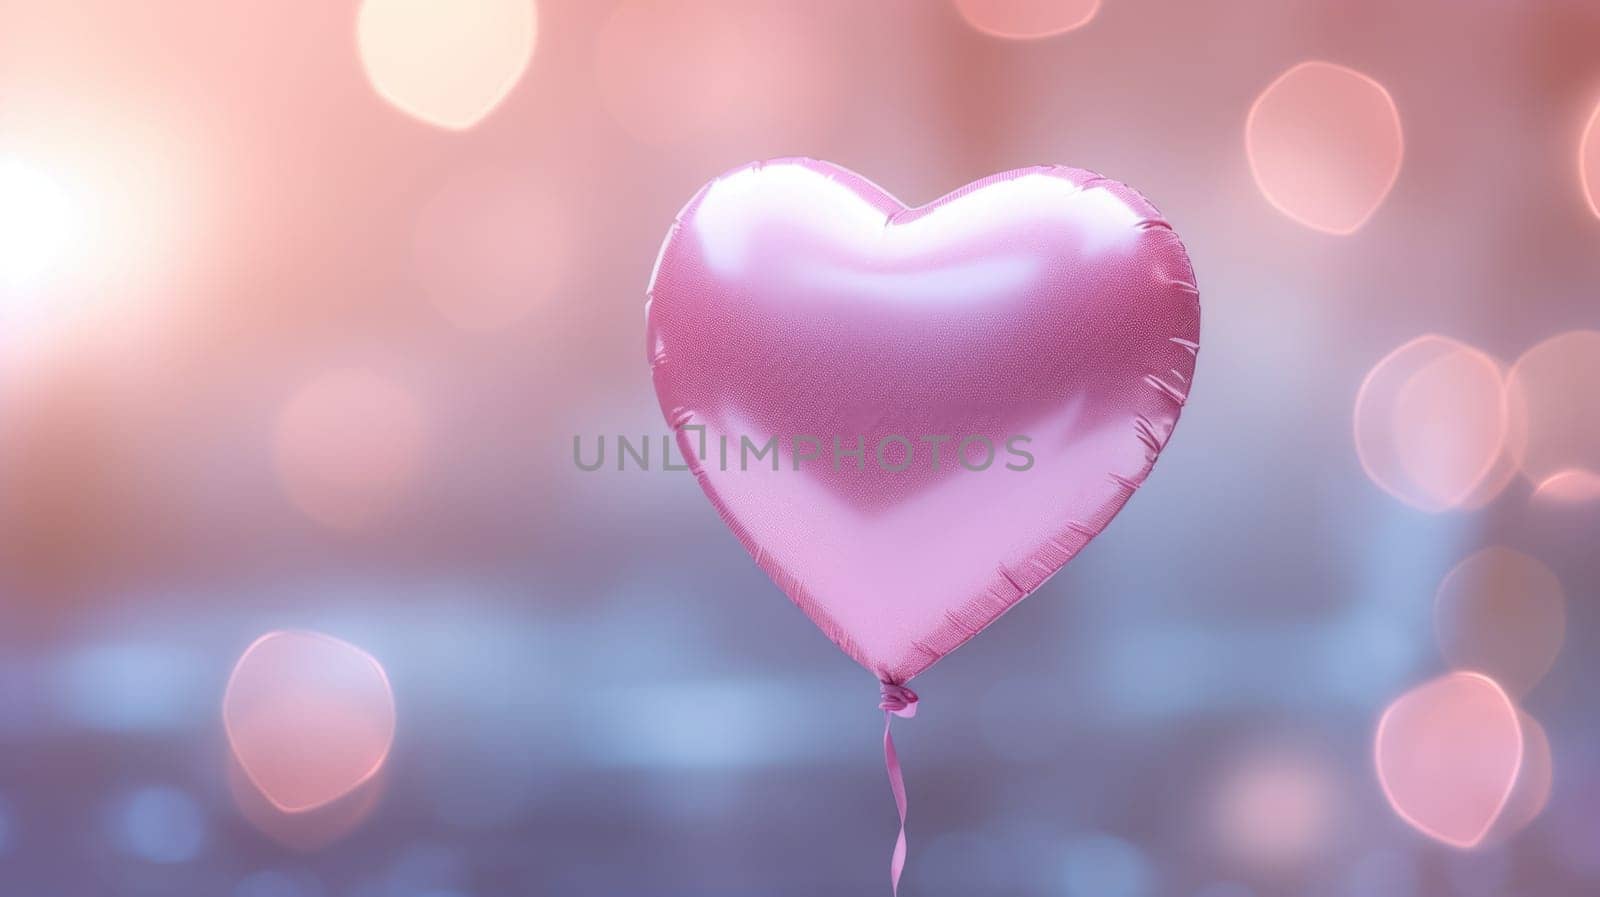 A pink heart shaped balloon floating in the air